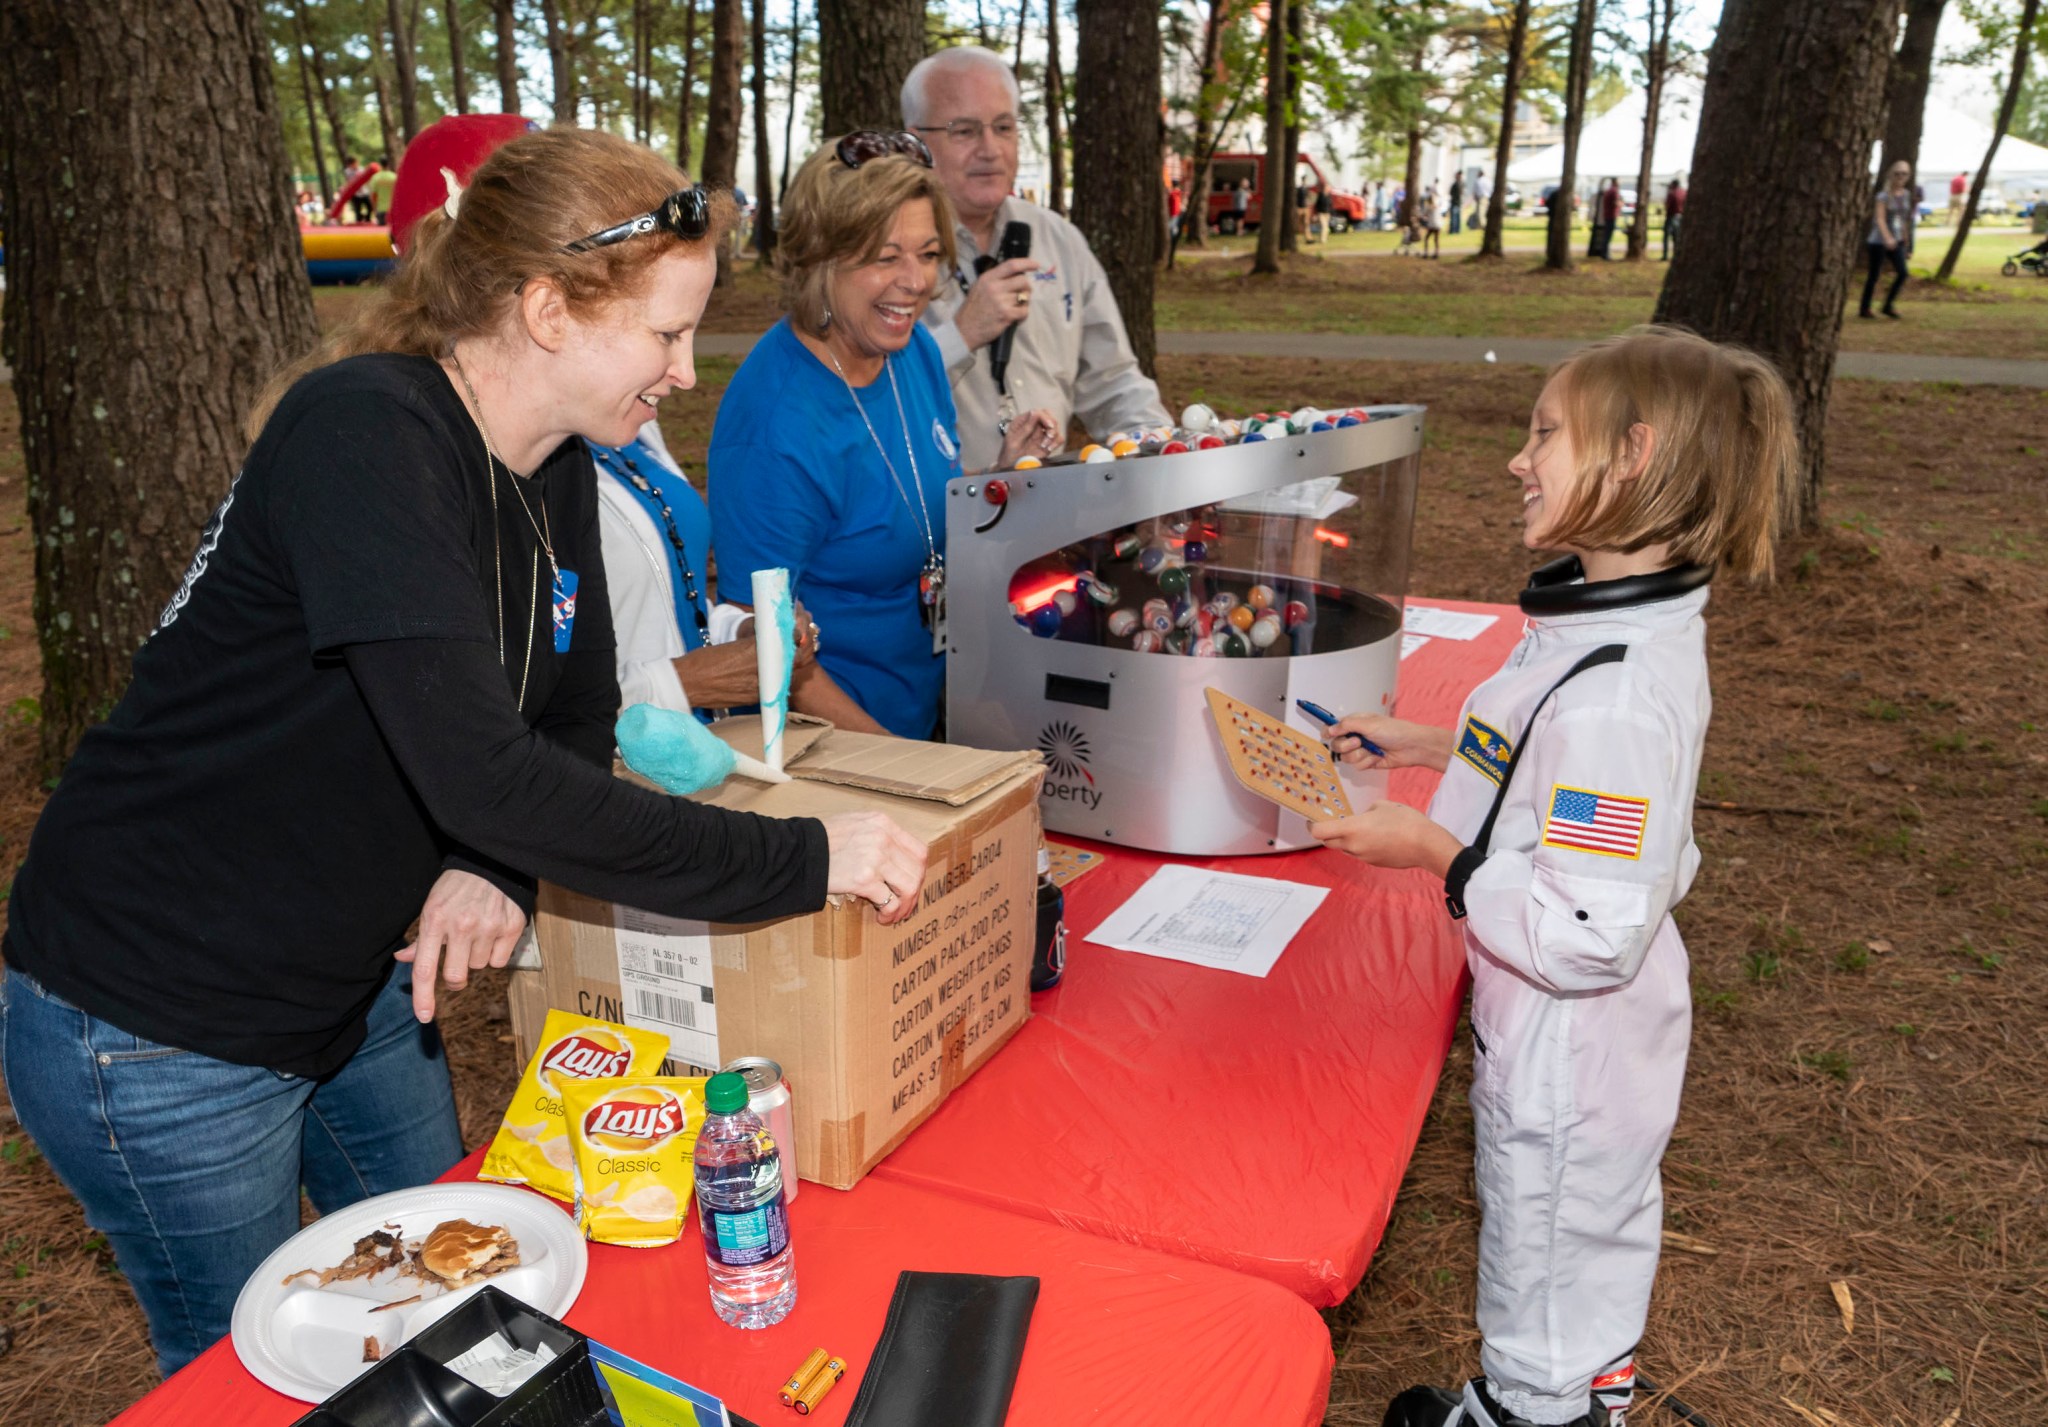 A future astronaut turns in her winning bingo card at Marshall's 2018 Fall Festival Oct. 18.